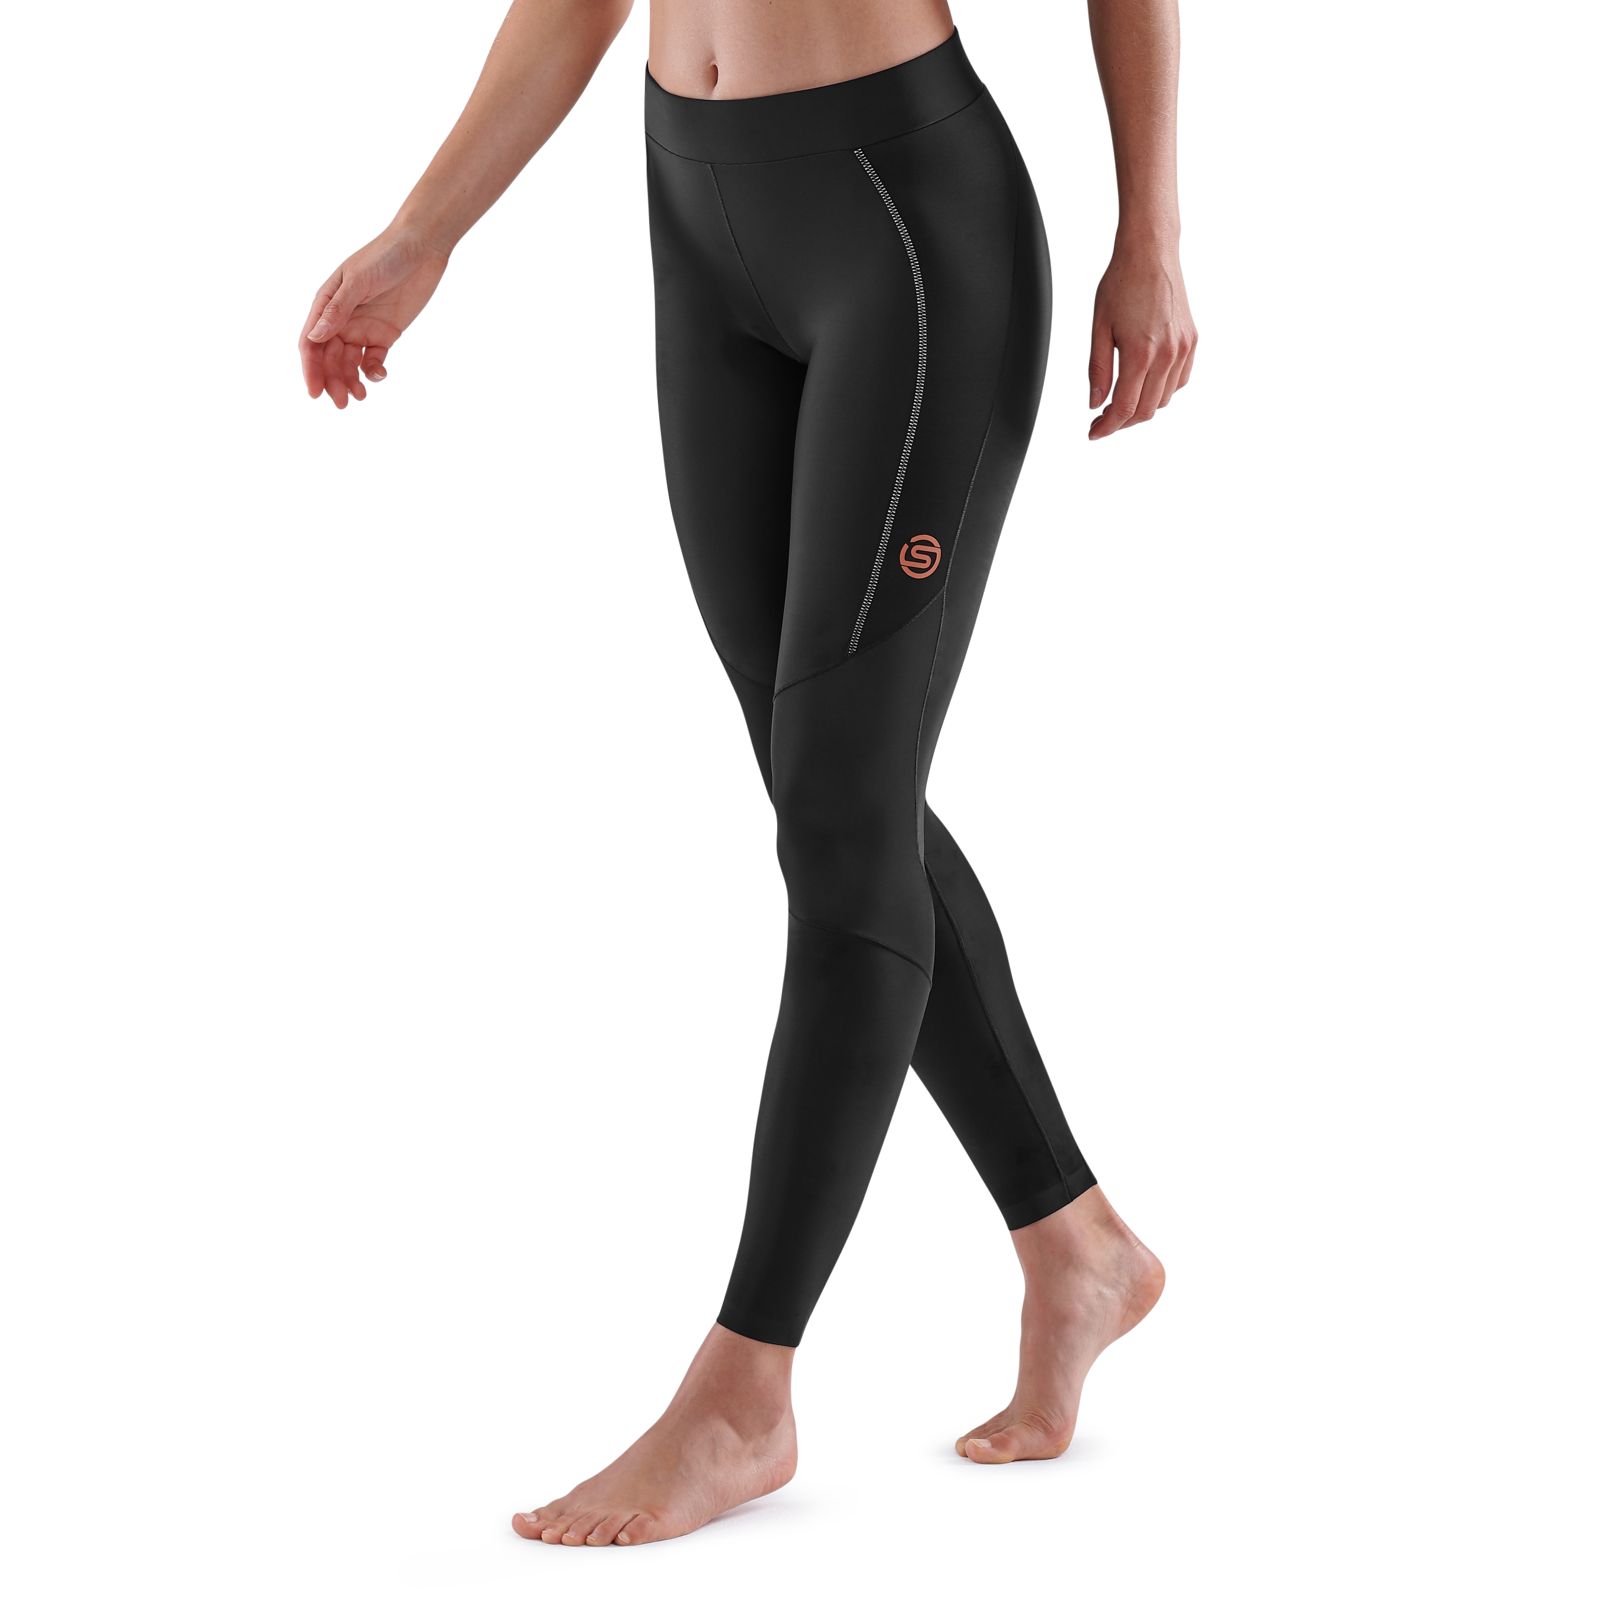 Skins A400 Womens Compression Long Tights (Black), GREAT BARGAIN